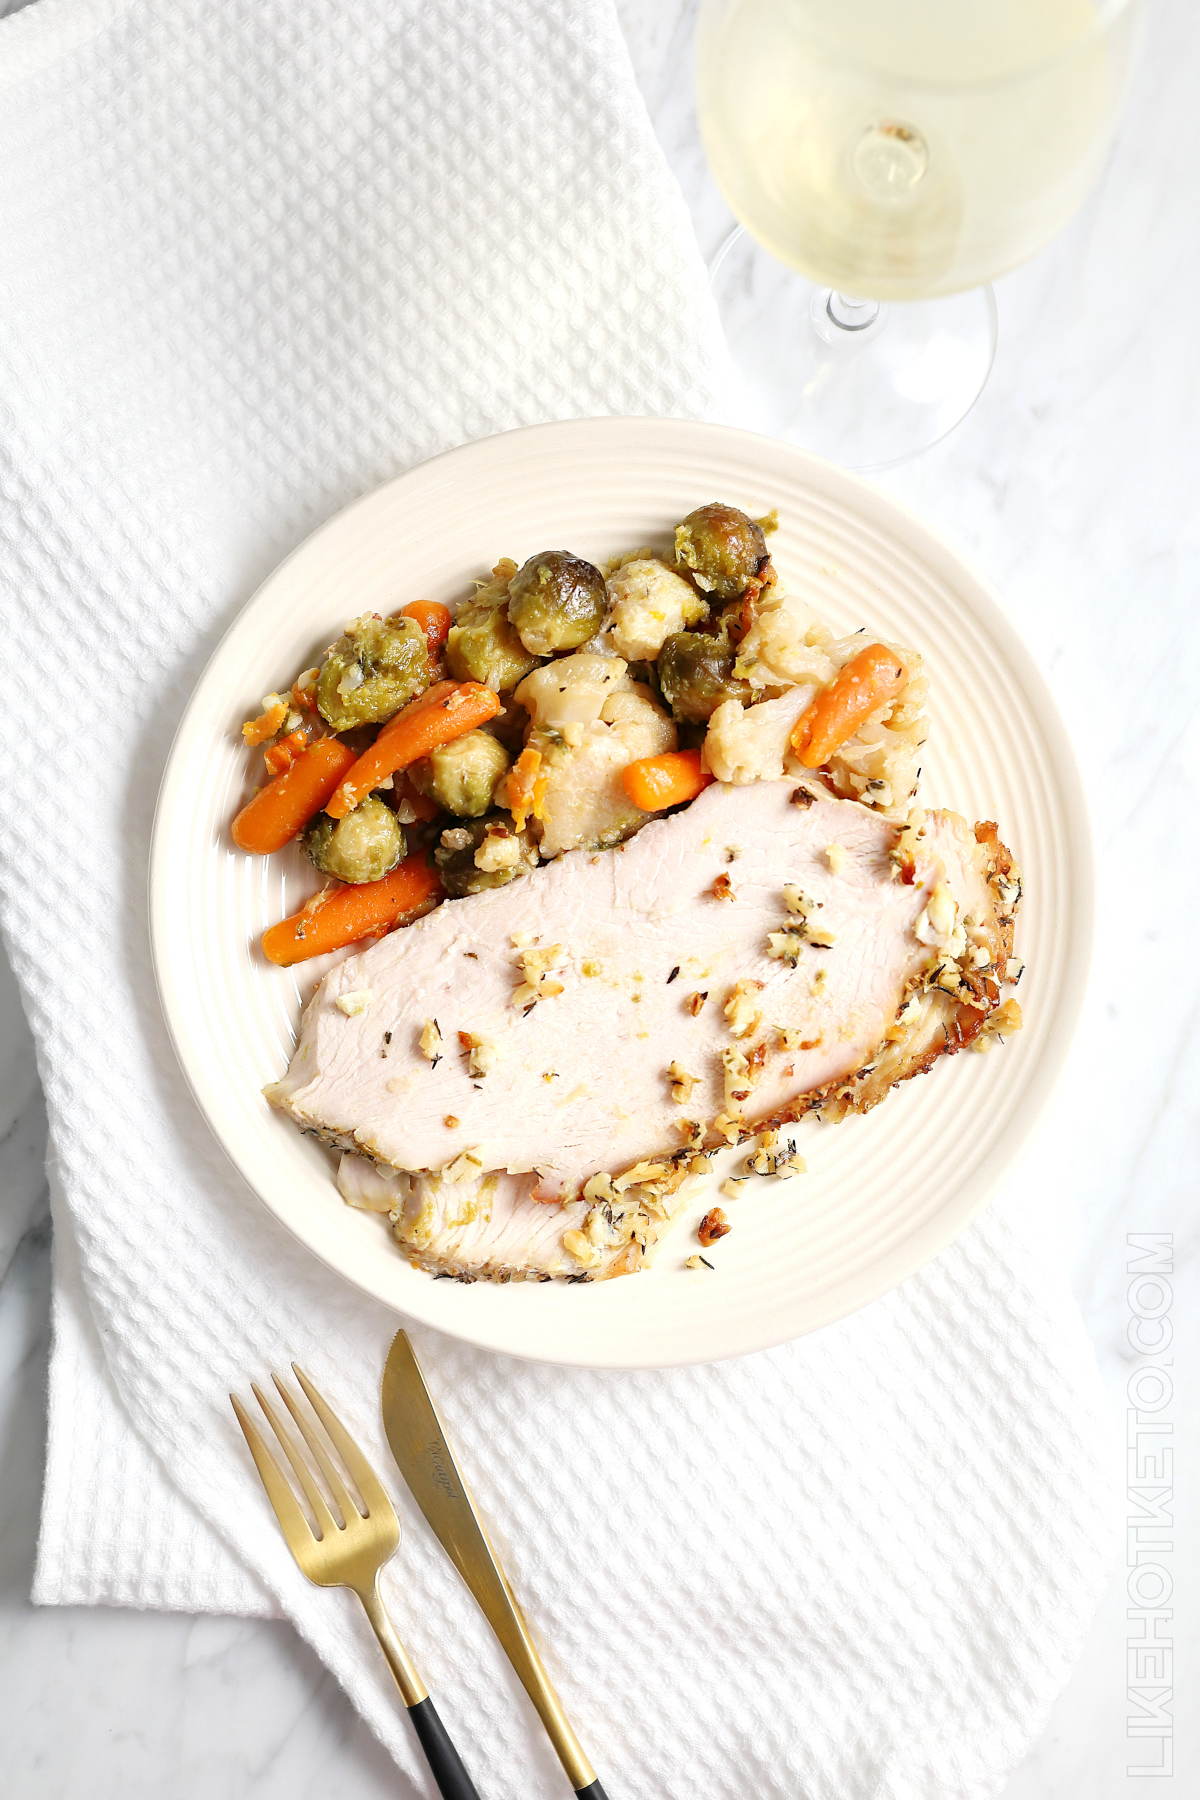 A generous serving of sliced skinless turkey breast and roasted keto veggies, with a glass of white wine.